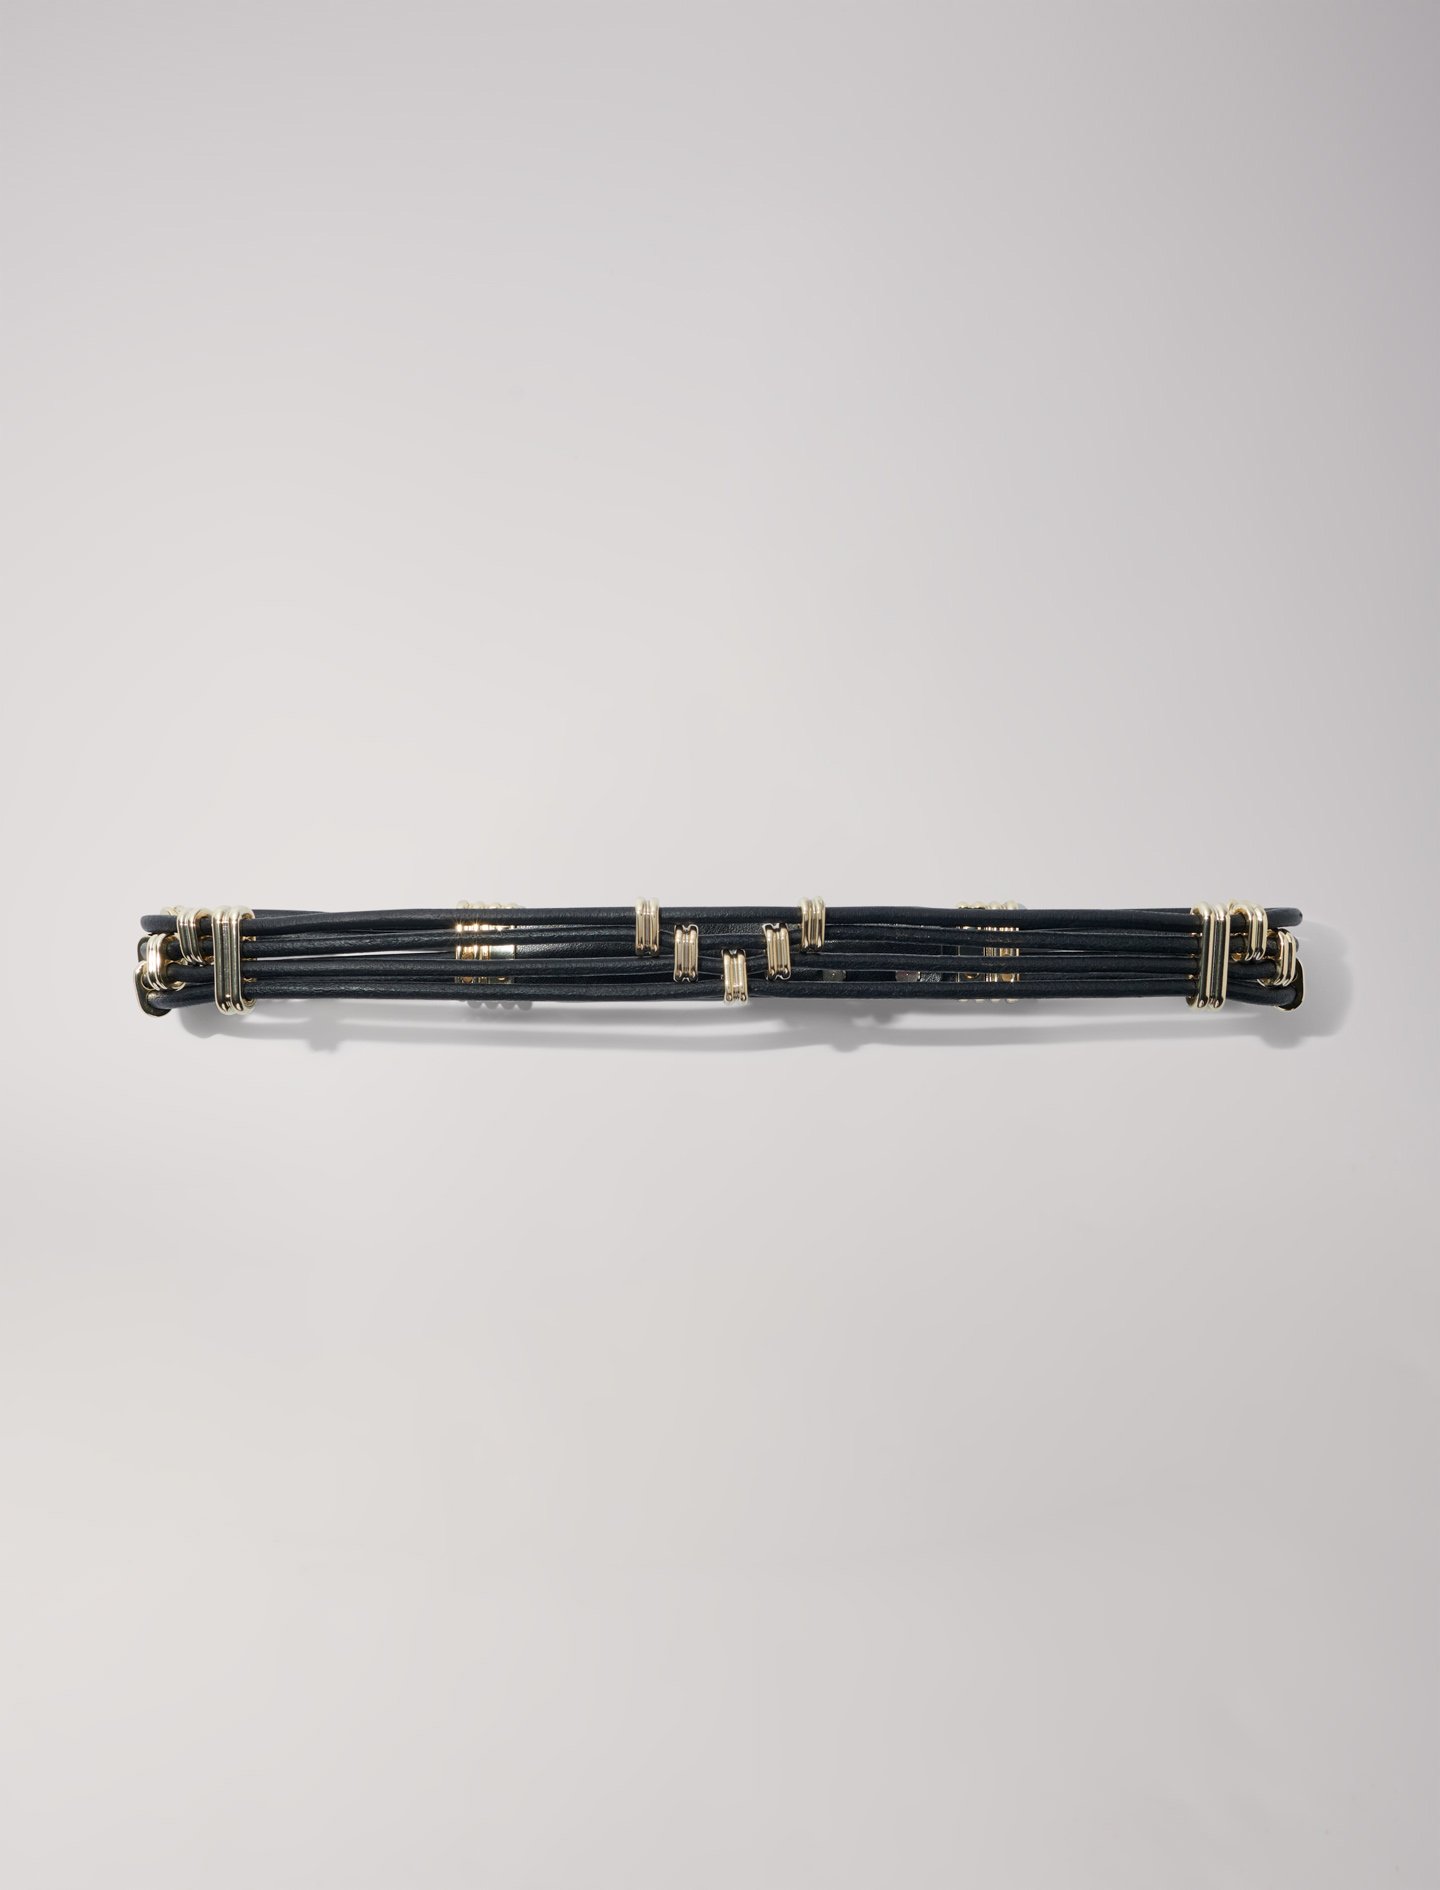 Mixte's polyester, Mixed metal and leather belt for Spring/Summer, size Mixte-Belts-US L / FR 3, in color Black / Black